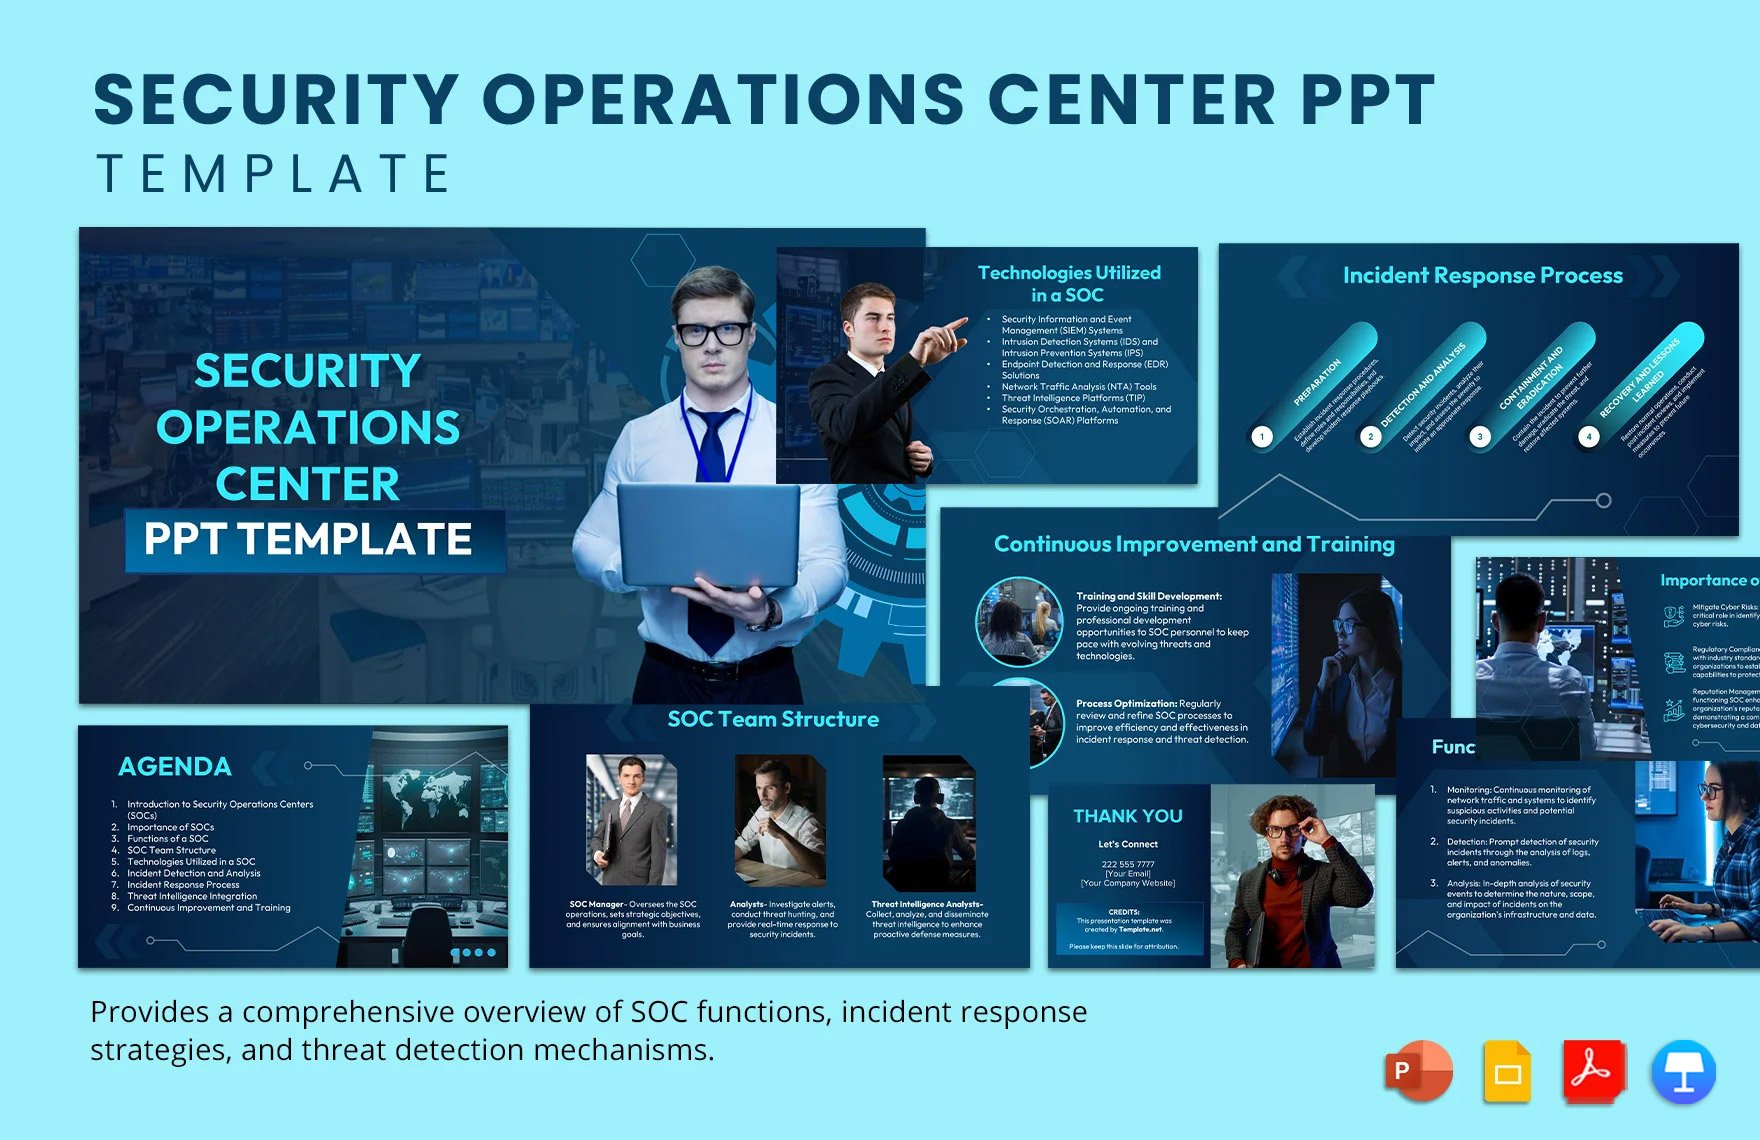 Security Operations Center PPT Template